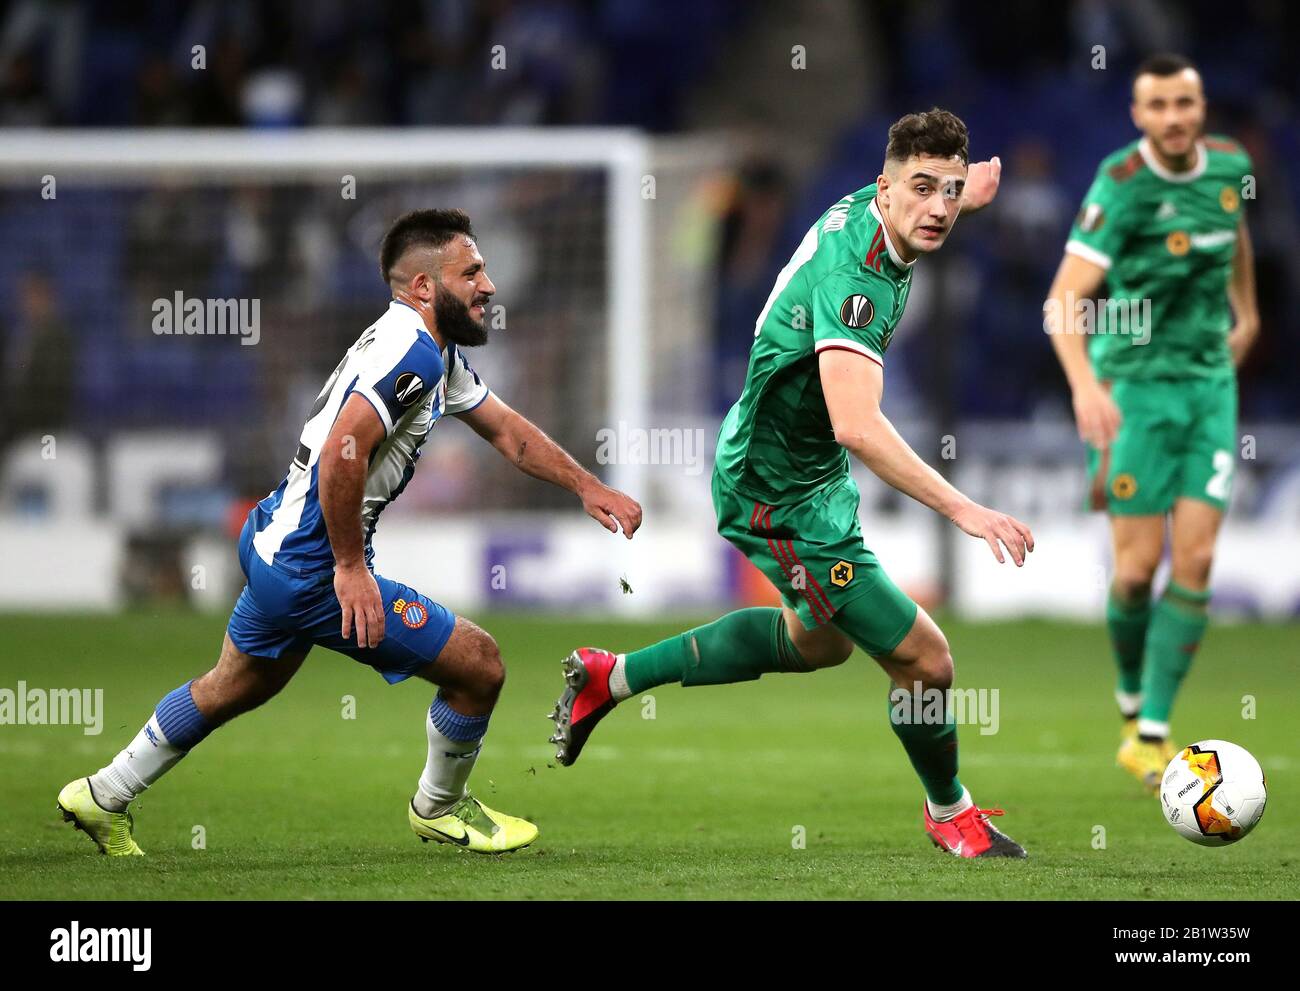 Wolverhampton Wanderers' Max Kilman (right) and Espanyol's Matias Vargas battle for the ball during the Europa League match at the RCDE Stadium, Barcelona. Stock Photo